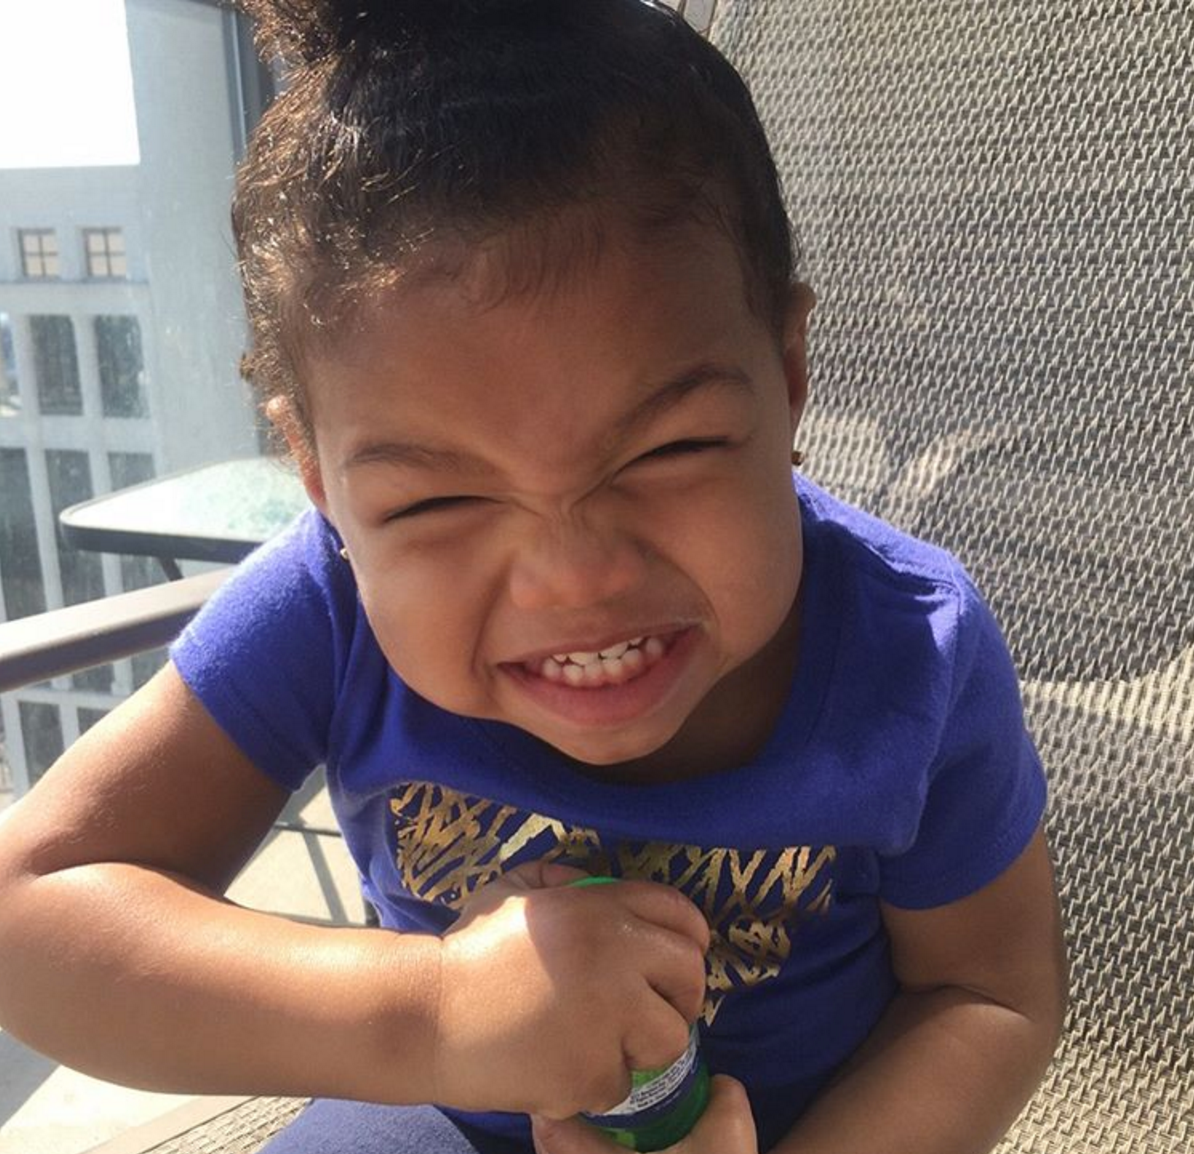 10 Photos of Chance The Rapper's Daughter Kensli That Will Steal Your Heart
